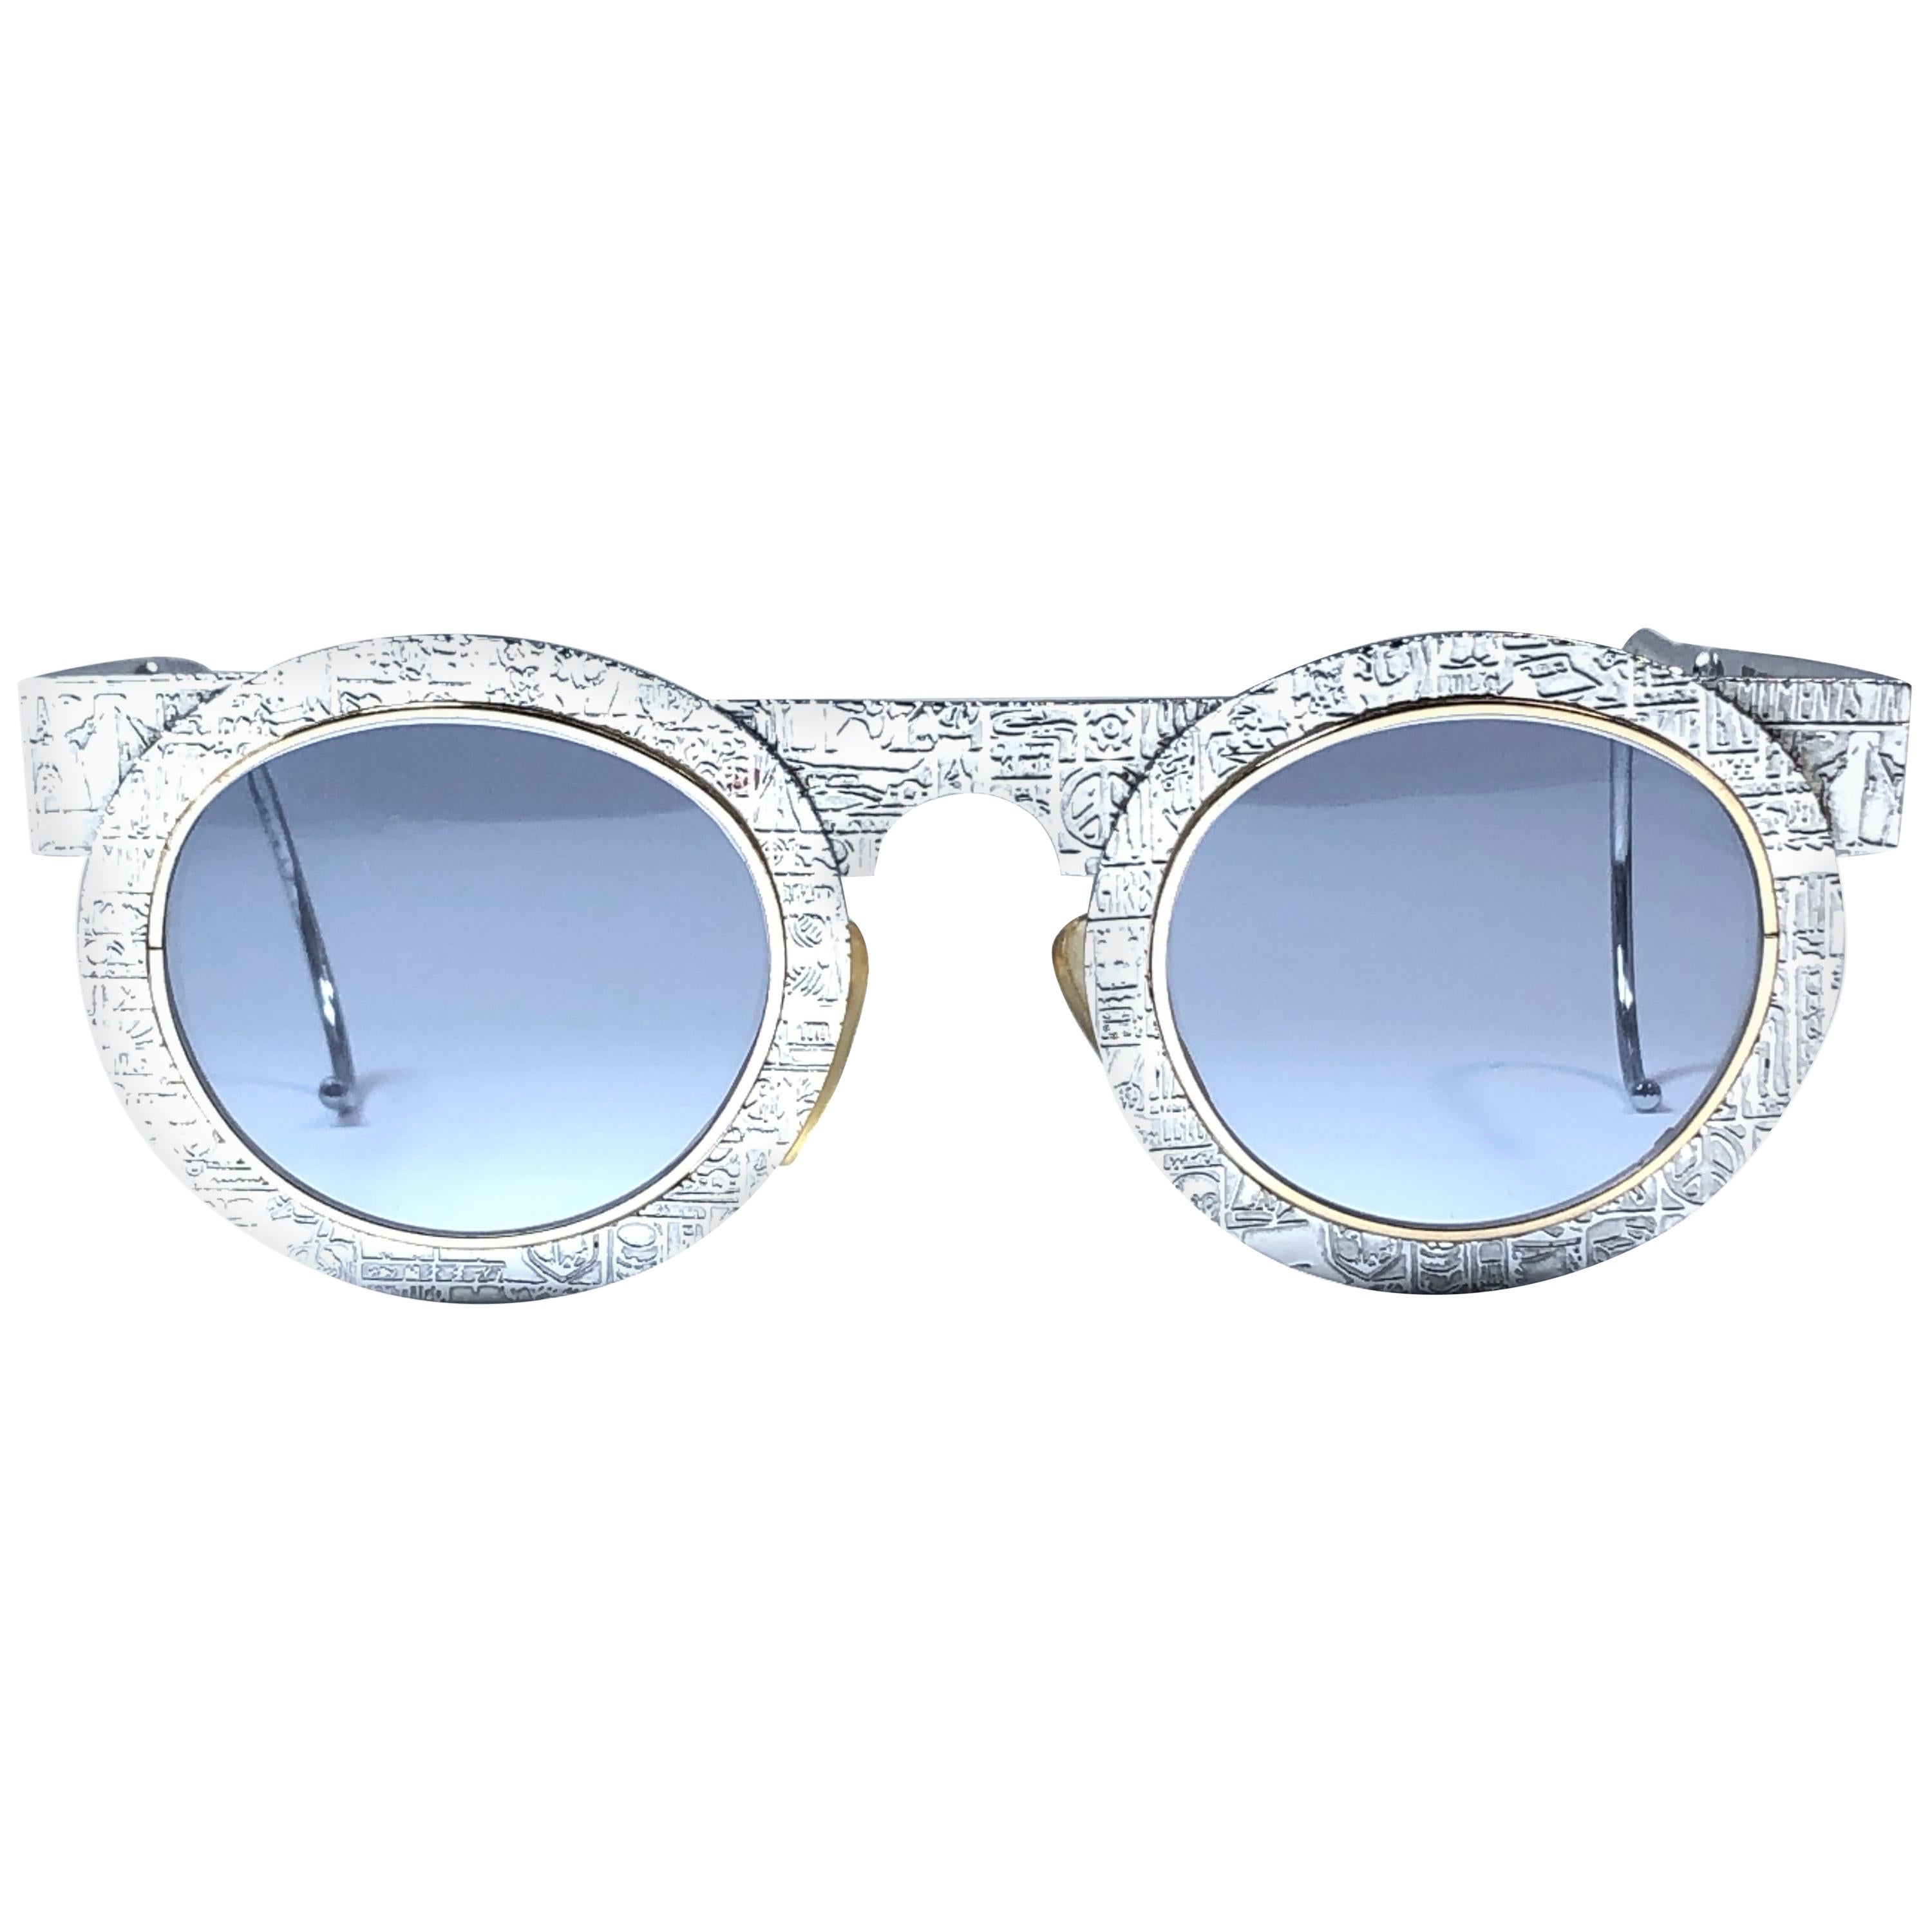 New Vintage IDC Pour Marithe Francois Girbaud Round Silver Sunglasses France